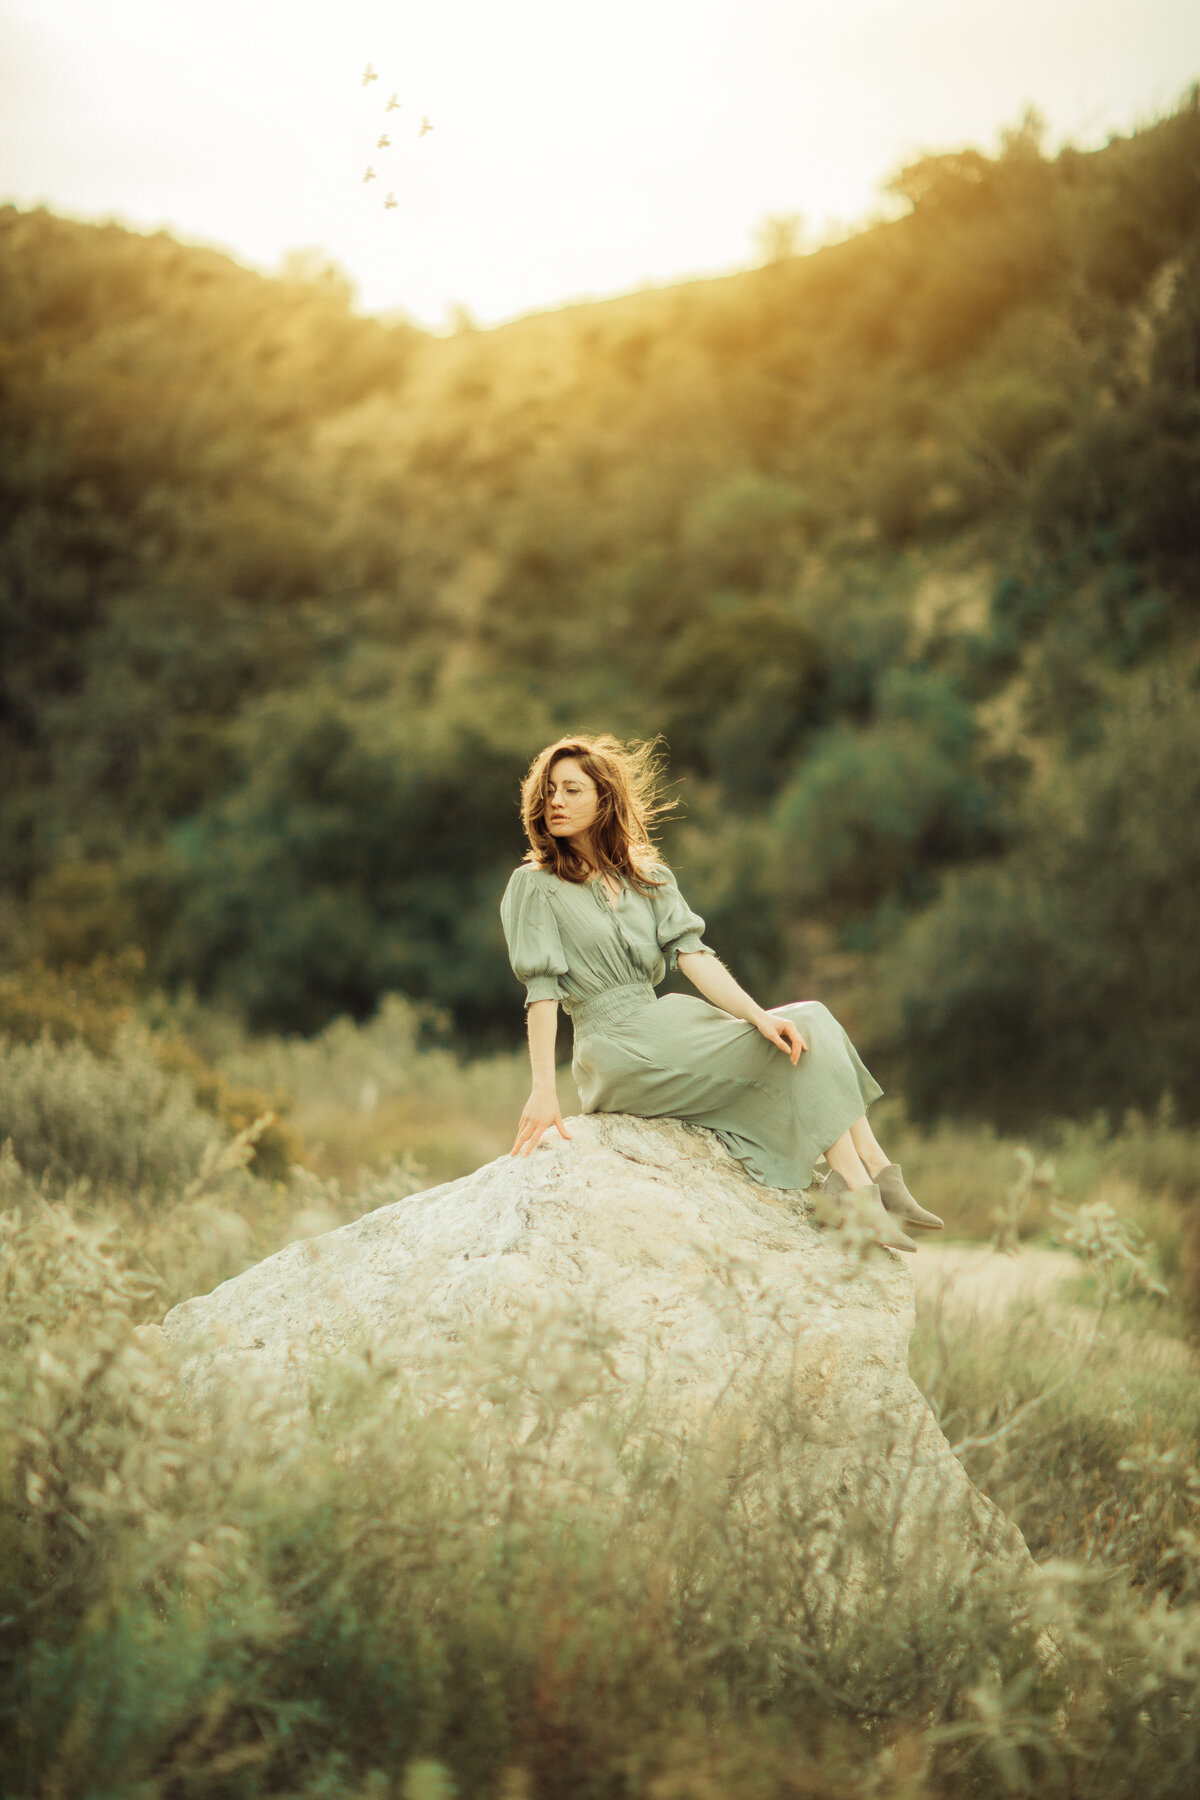 Portrait Photo Of Young Woman In Dress Sitting On a Rock Los Angeles